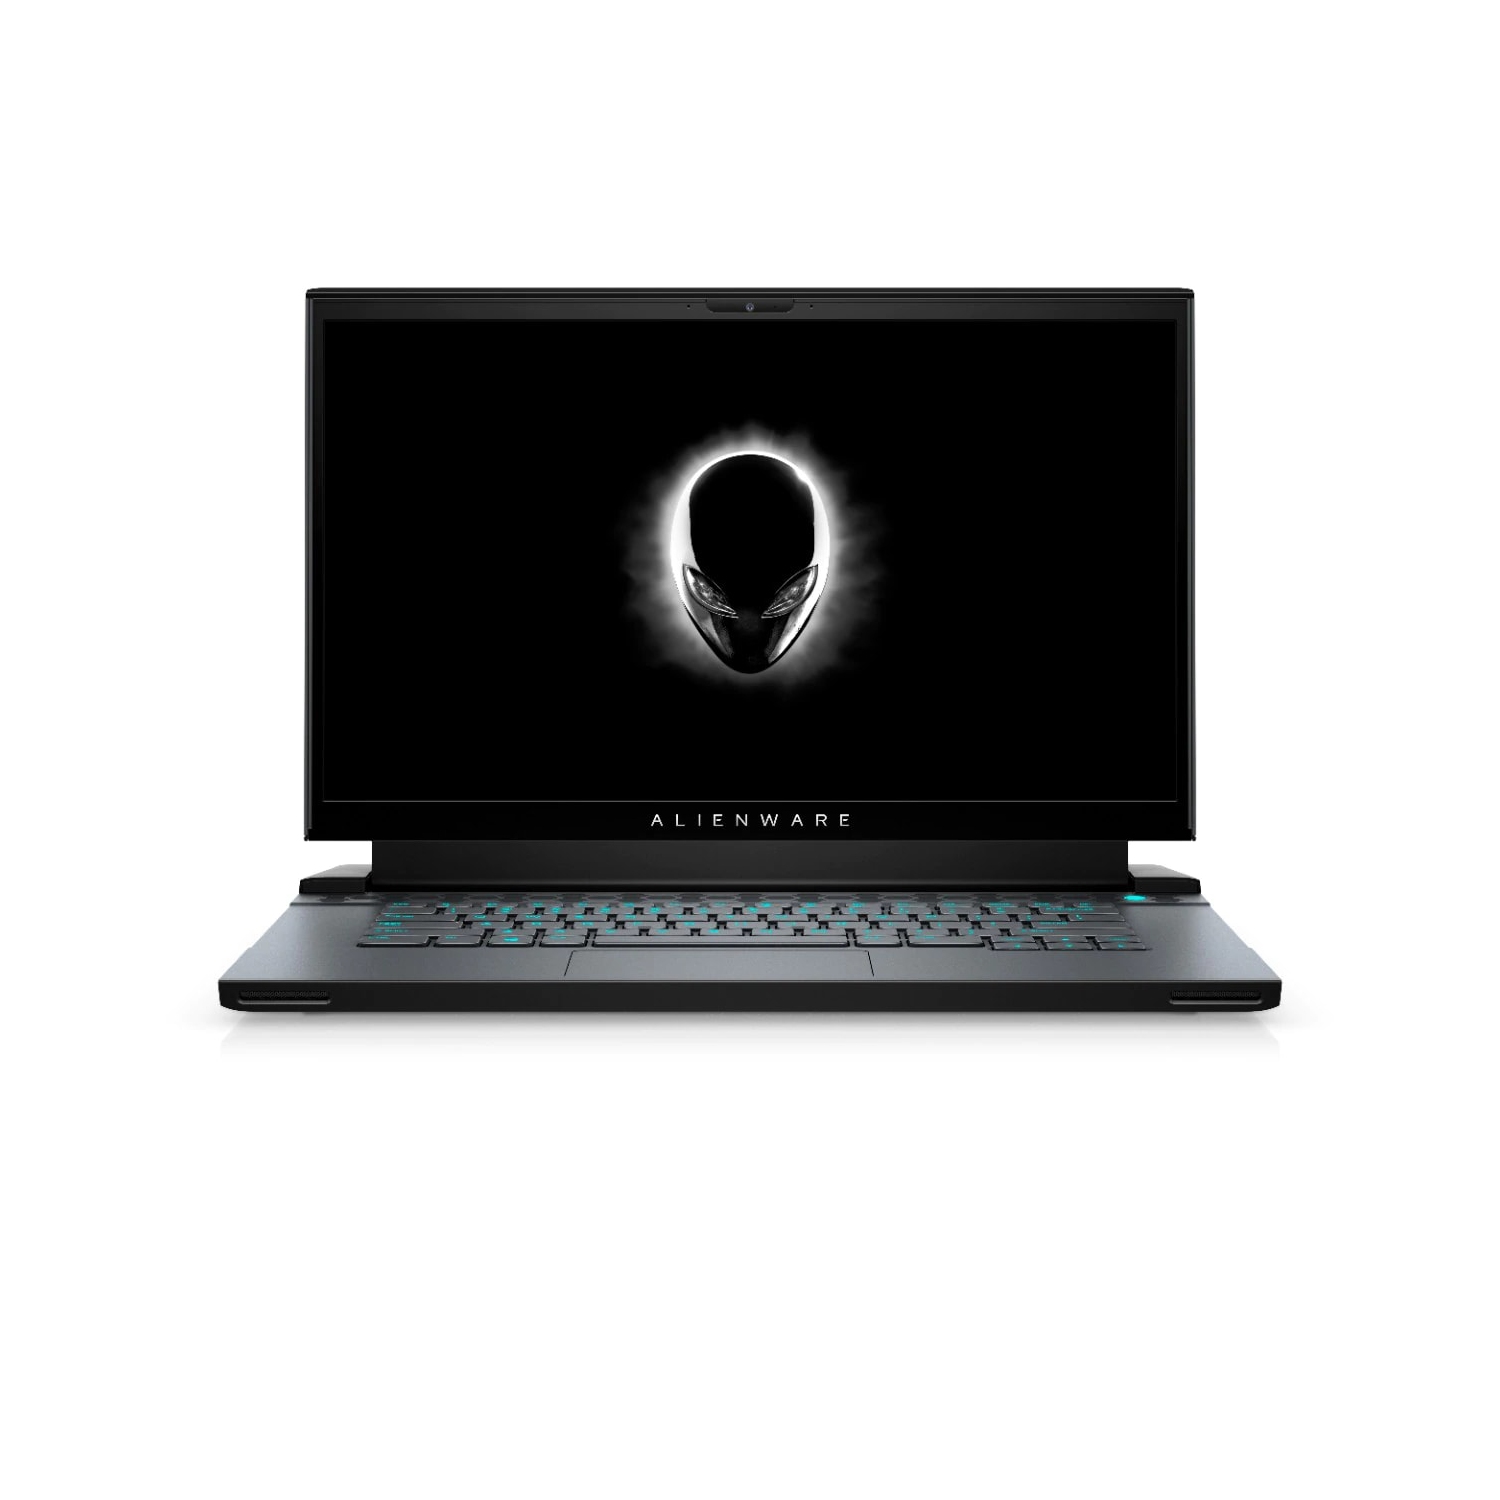 Refurbished (Excellent) - Dell Alienware m15 R4 Gaming Laptop (2021), 15.6" FHD, Core i7, 2TB SSD + 512GB SSD, 32GB RAM, RTX 3080, 5 GHz, 10th Gen CPU Certified